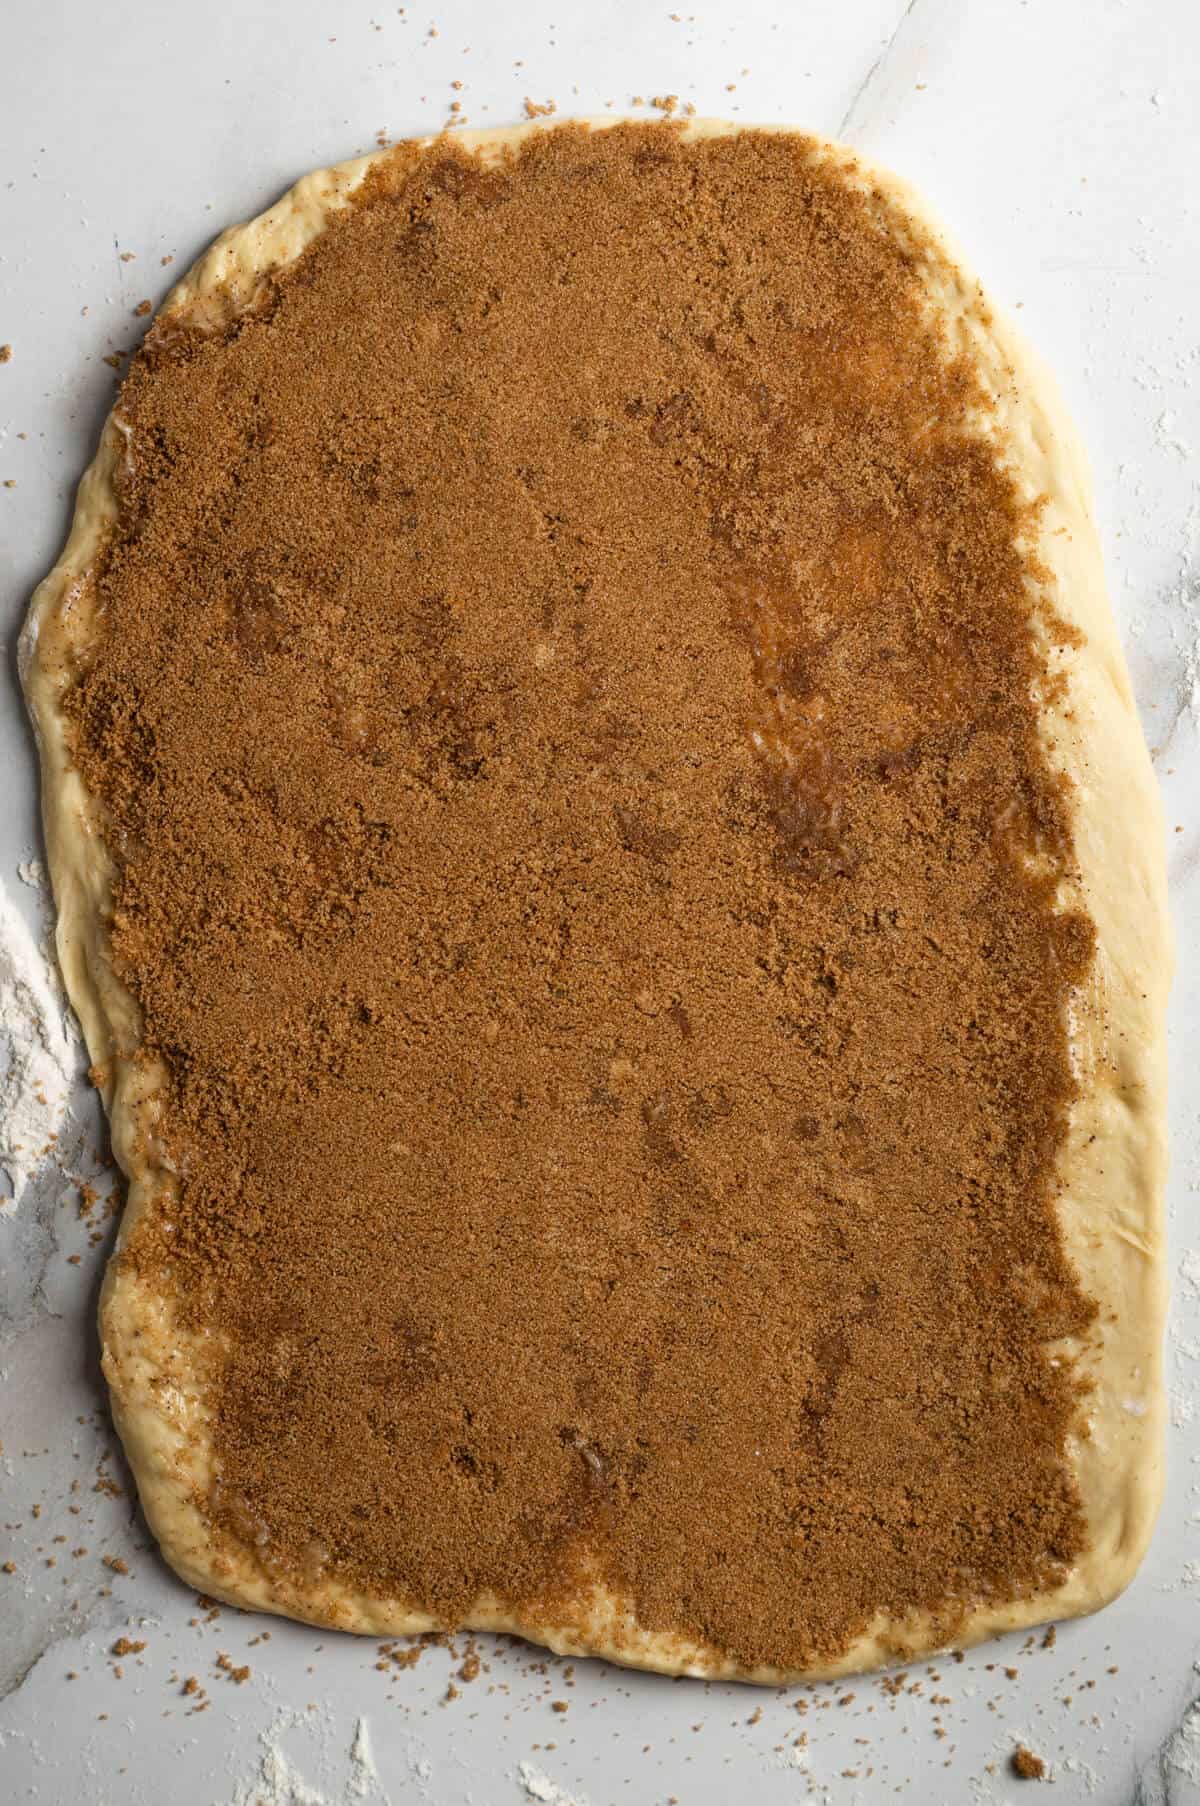 The cinnamon roll dough rolled out into a rectangle with browned butter and the cinnamon sugar mixture spread over the top.